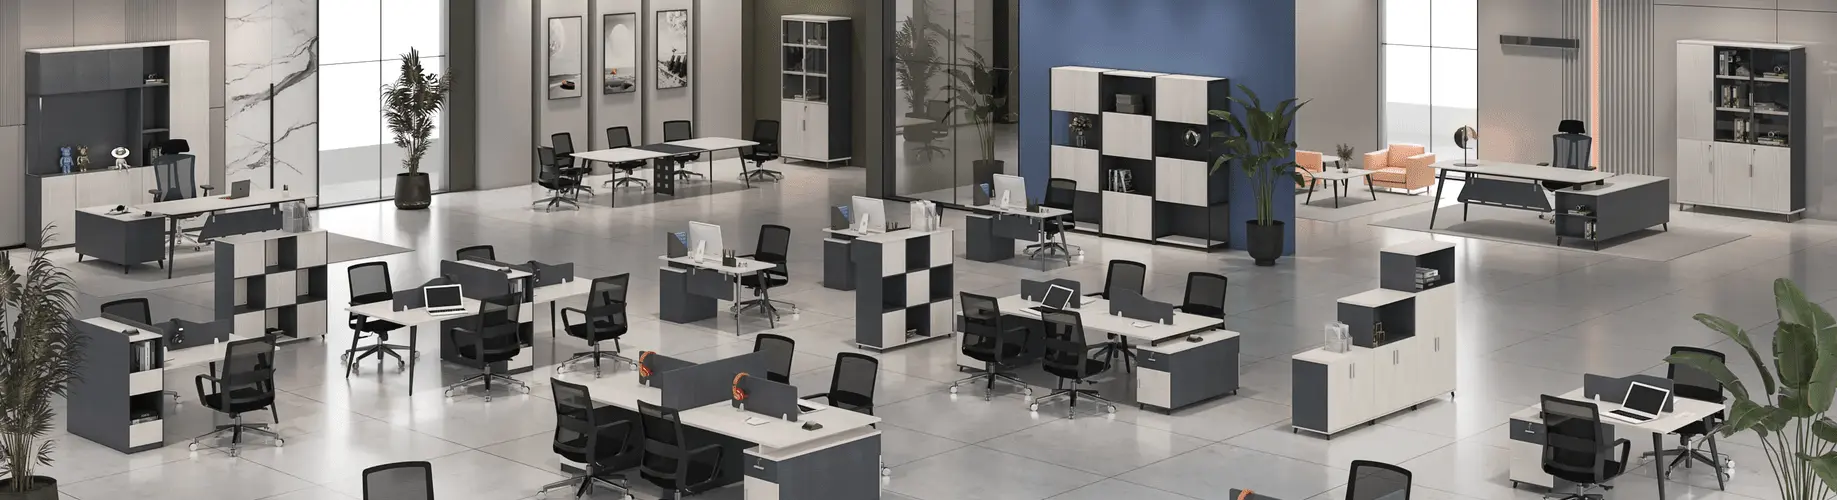 Cost Effective and Functional Office Furniture Solutions